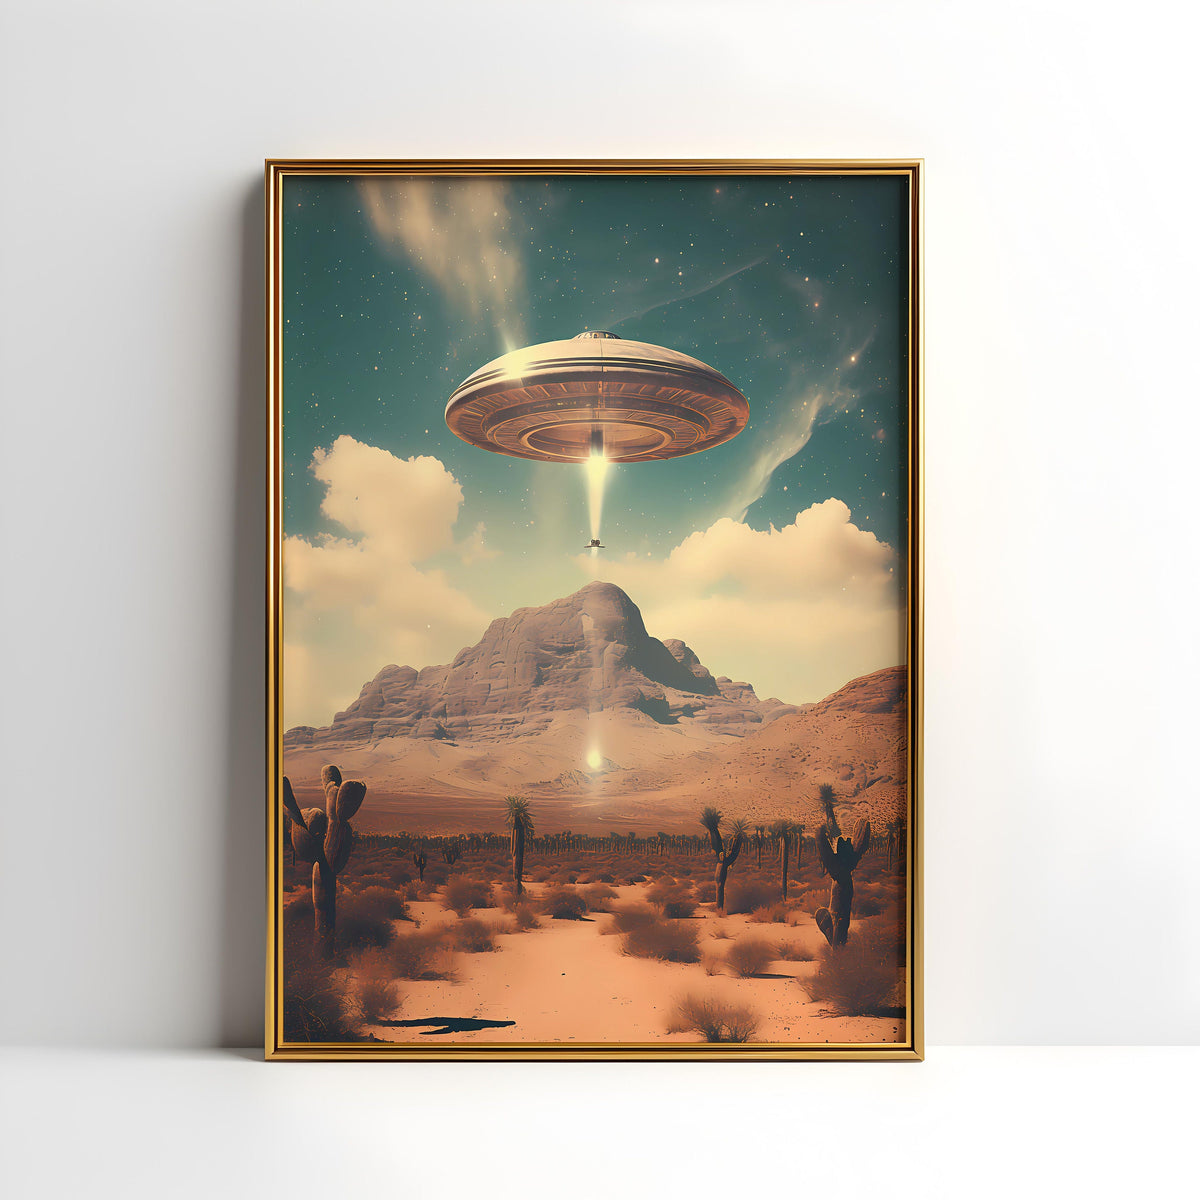 a painting of a flying saucer above a desert landscape